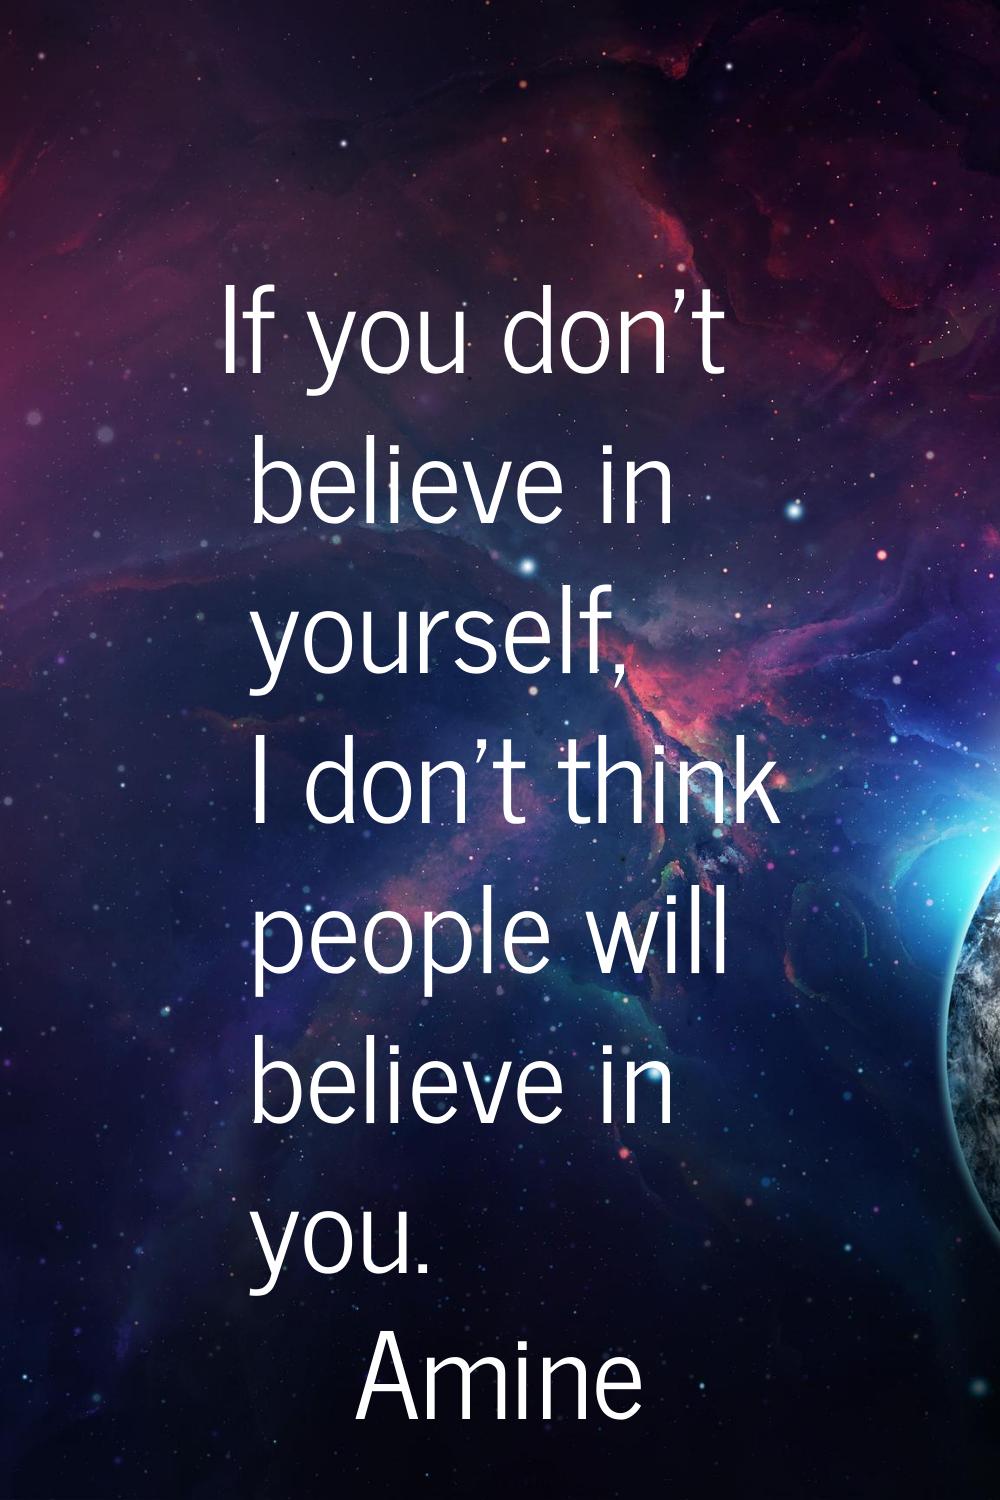 If you don't believe in yourself, I don't think people will believe in you.